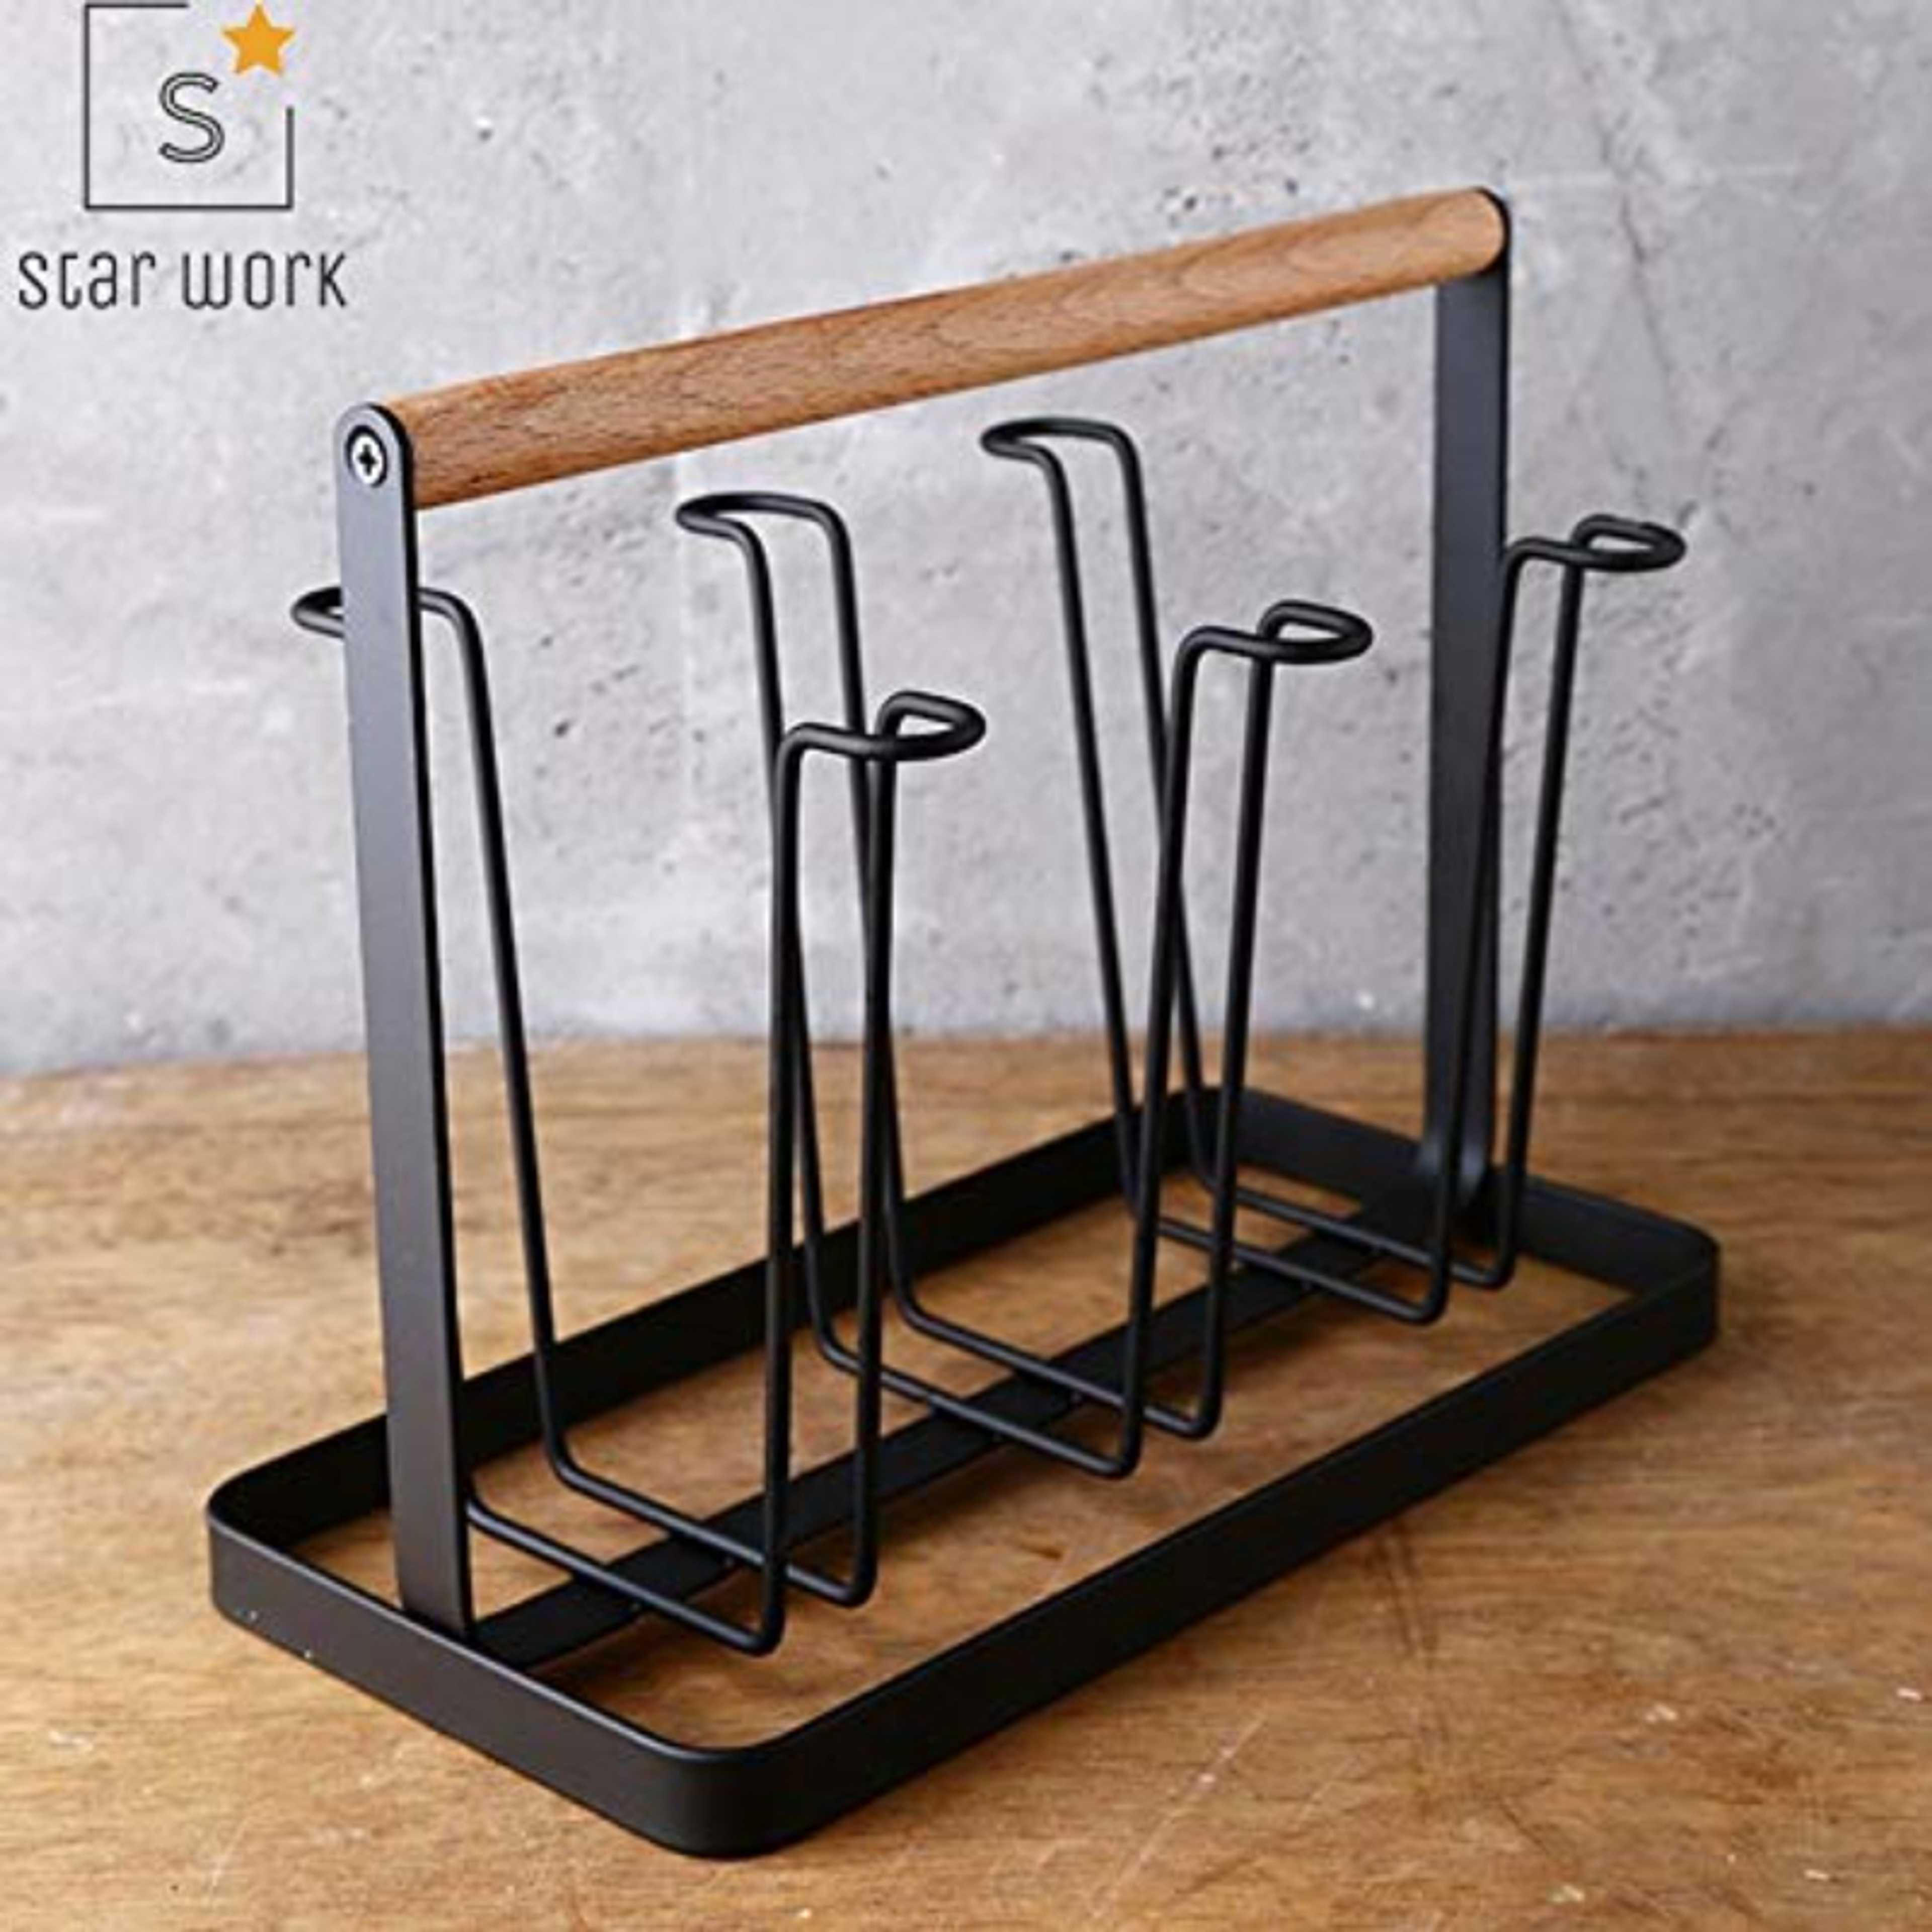 6 Glass Holder and Glass Stand for Dining | Mug Cup Organiser Shelf for Kitchen with Wooden Handle, Metal